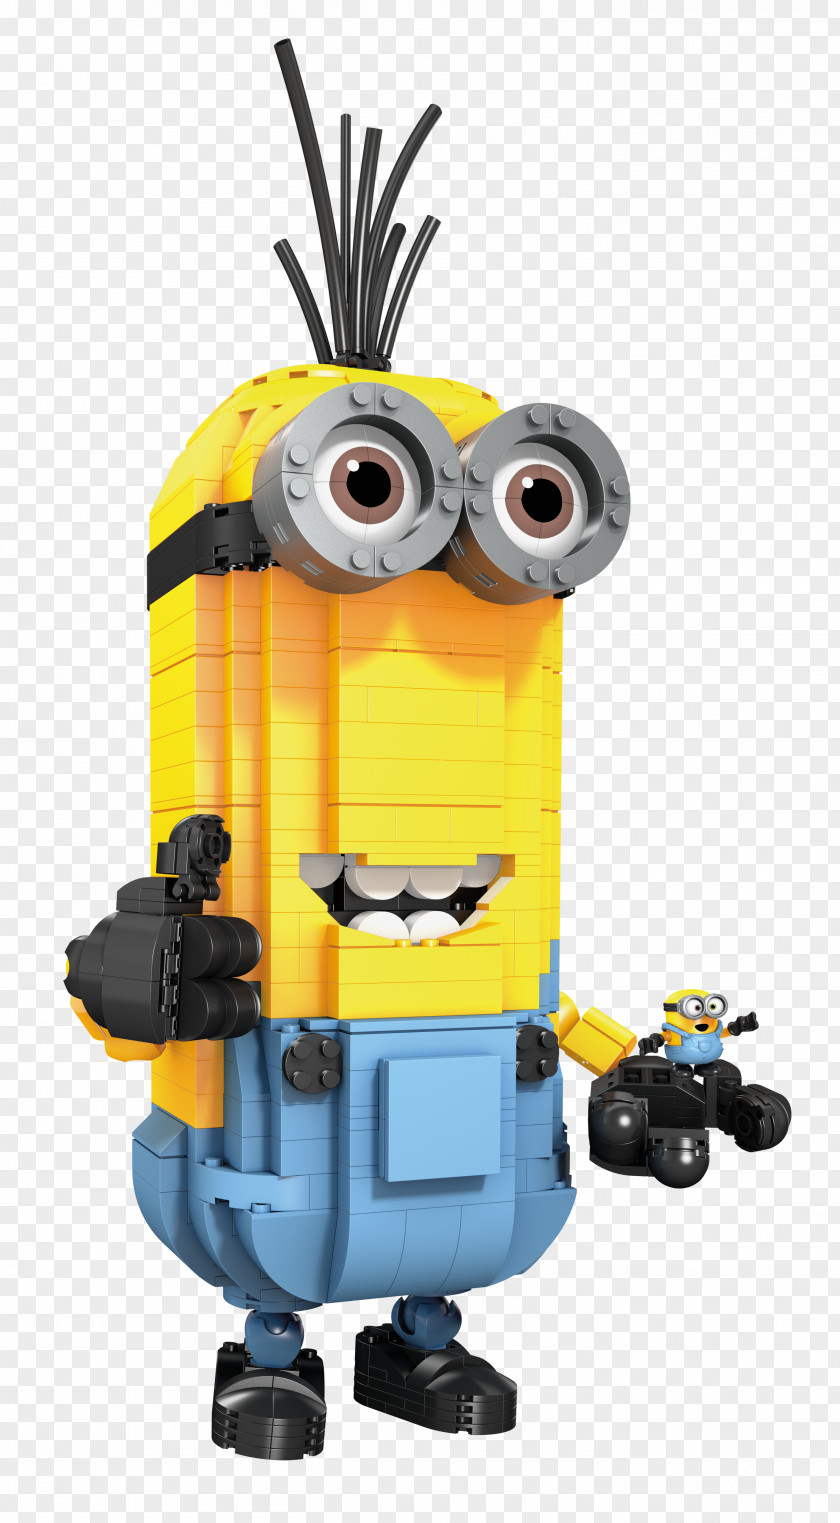 Minions Kevin The Minion Toy Despicable Me: Rush Mega Brands Construction Set PNG